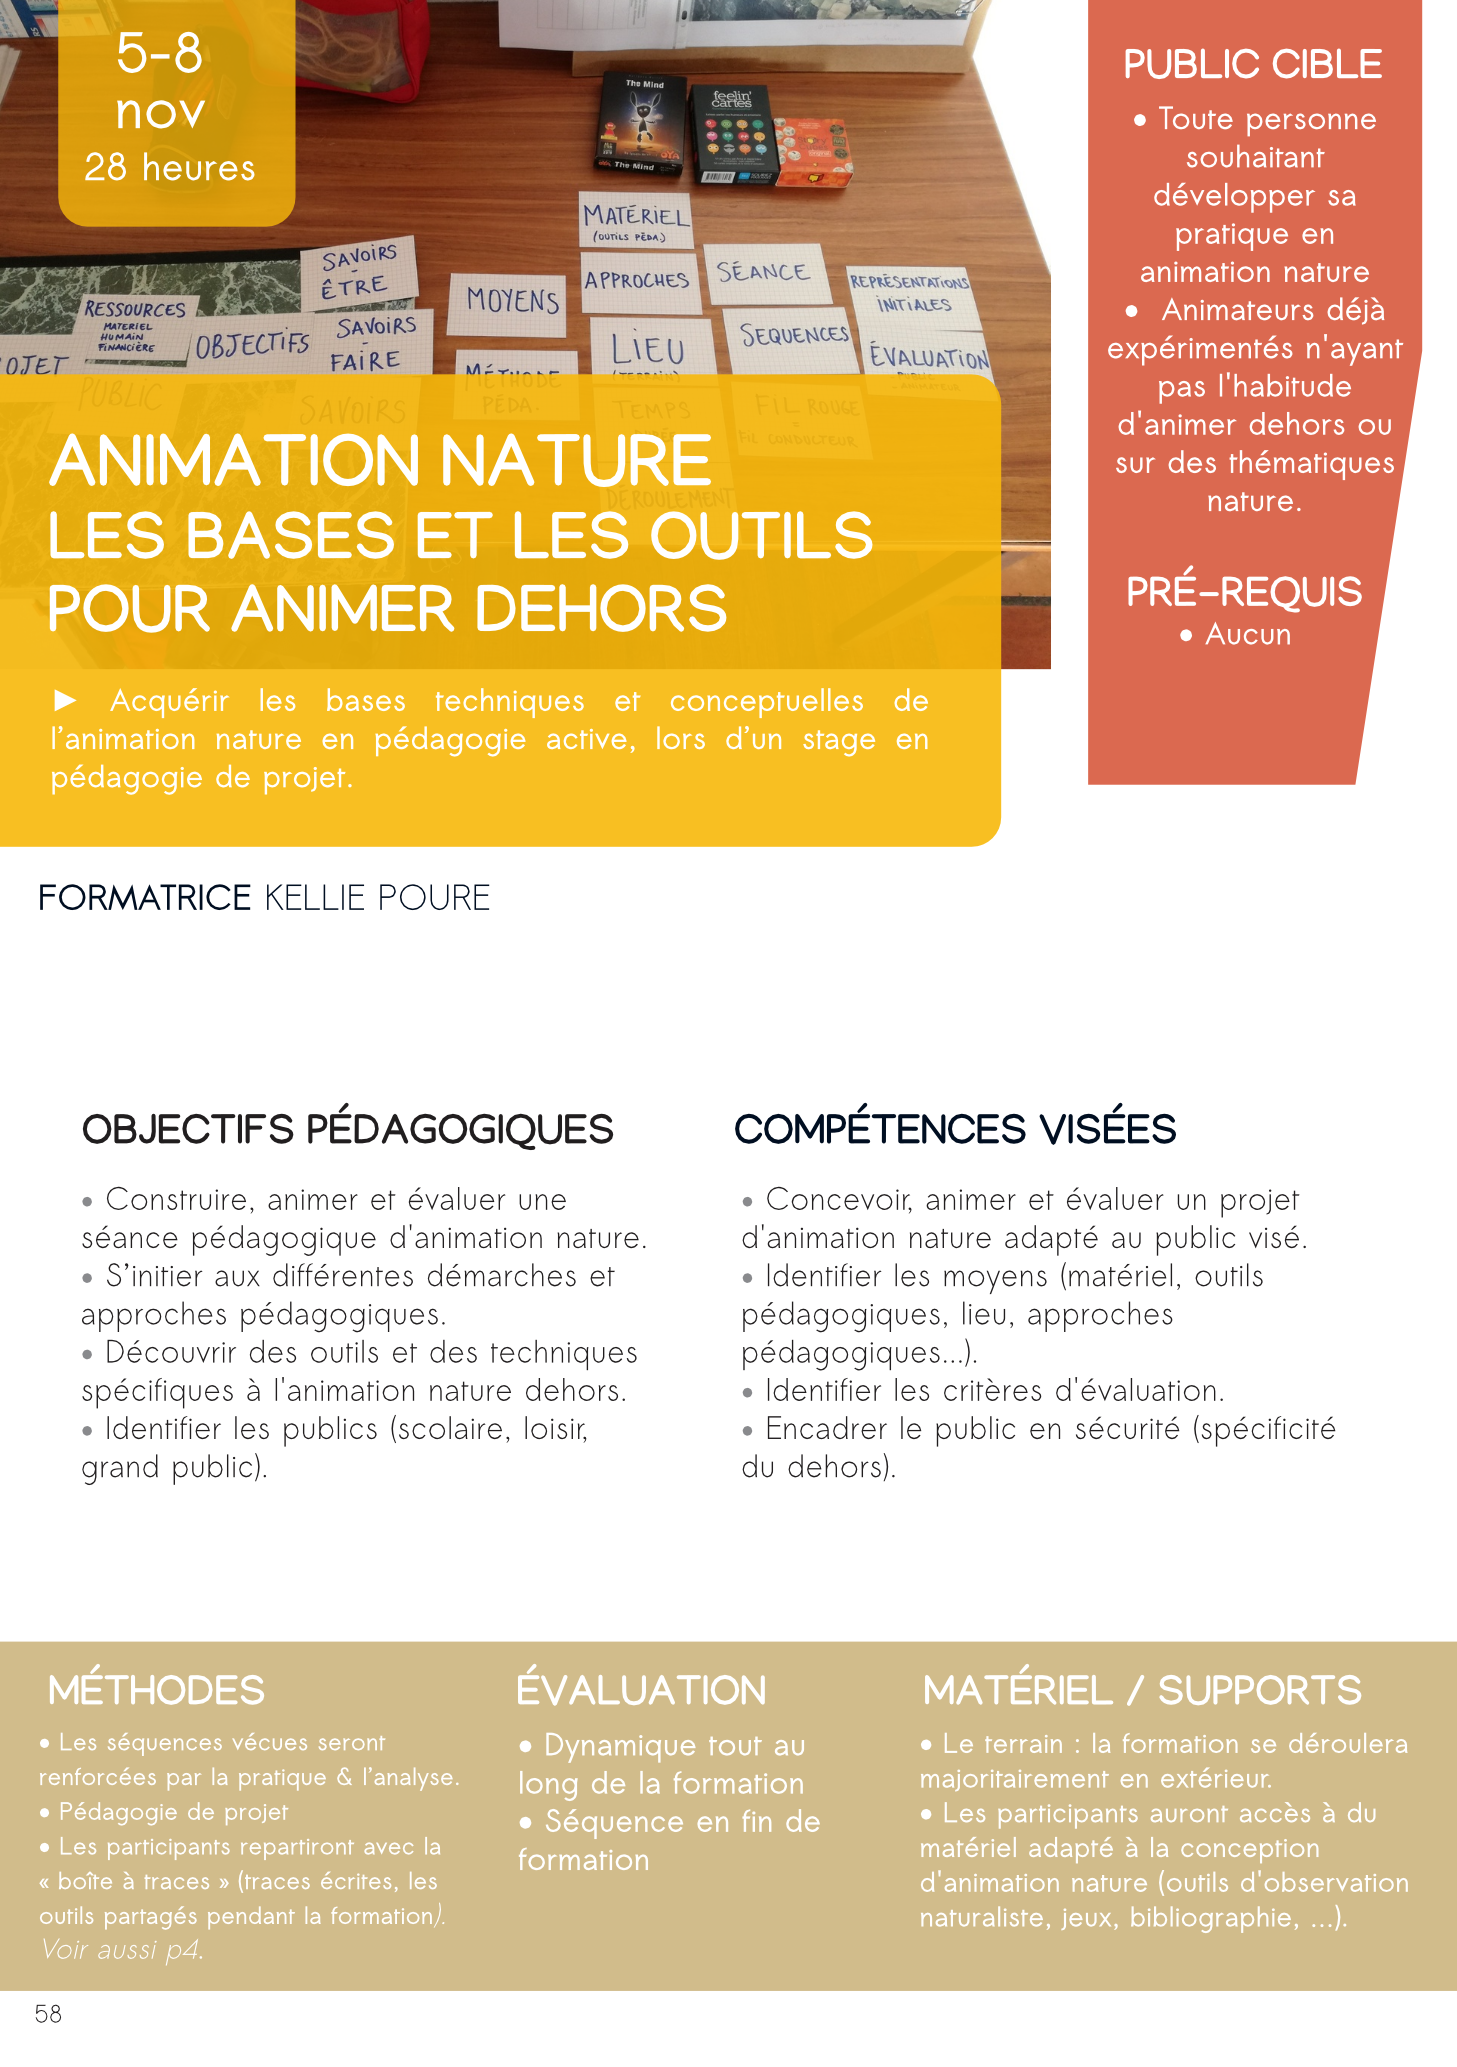 formations naturalistes ecologie animation nature occitanie